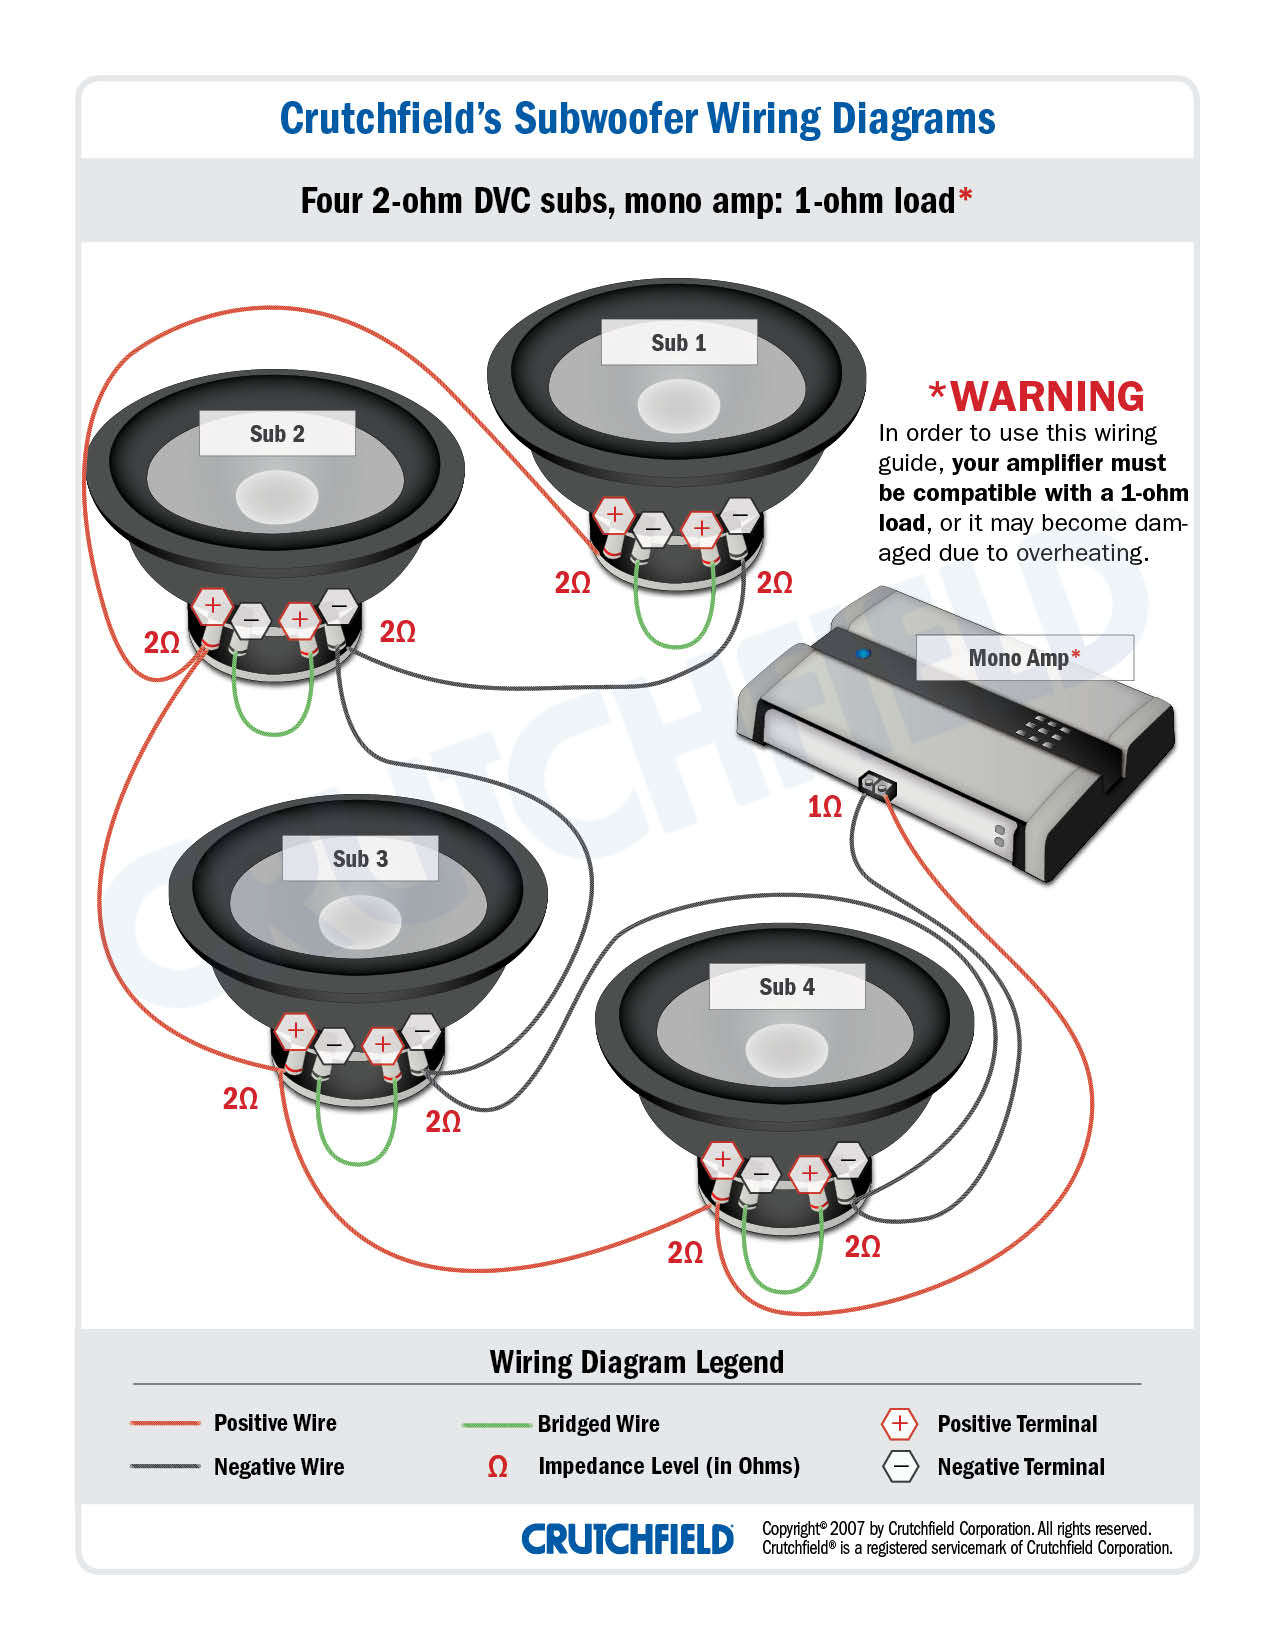 Subwoofer Wiring Diagram For 6 Subs from images.crutchfieldonline.com